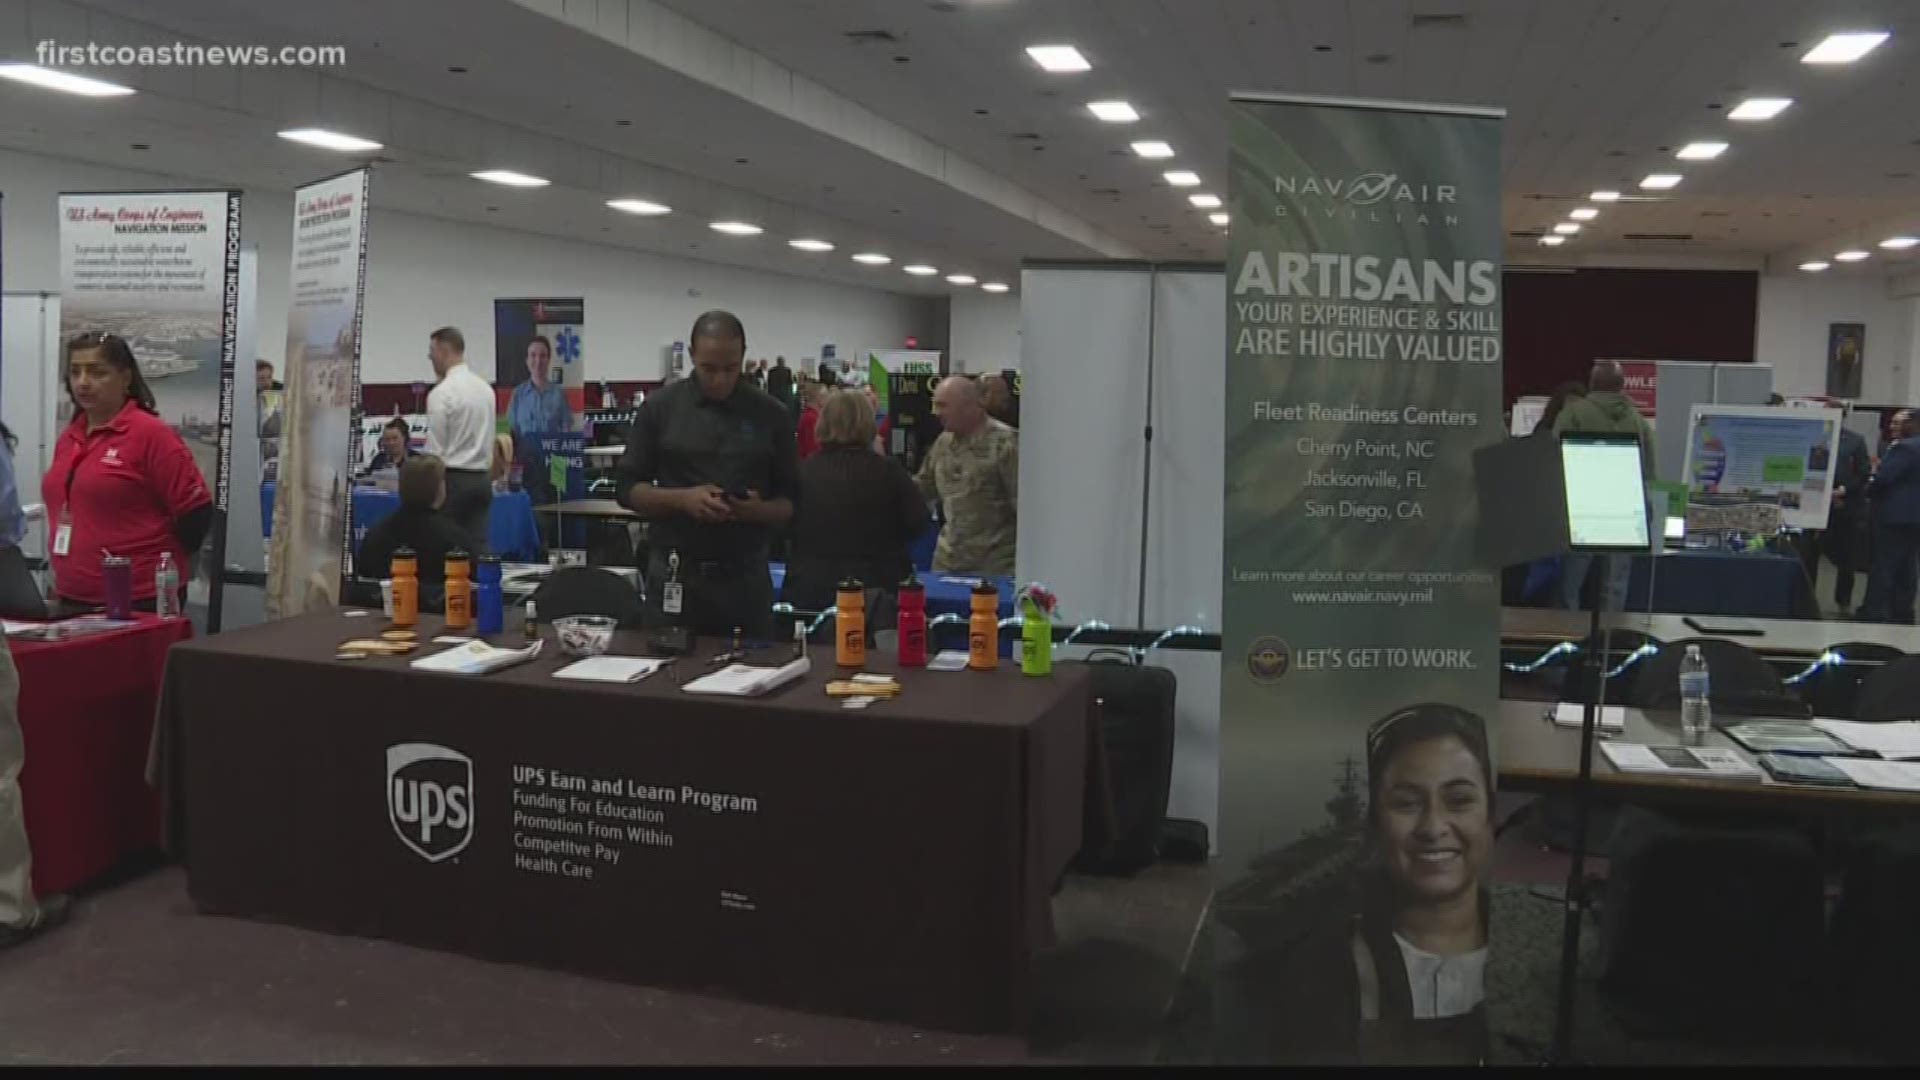 The Navy Tri-Base Job Fair was held on Wednesday at the Morocco Temple in Jacksonville and featured over 150 employers.